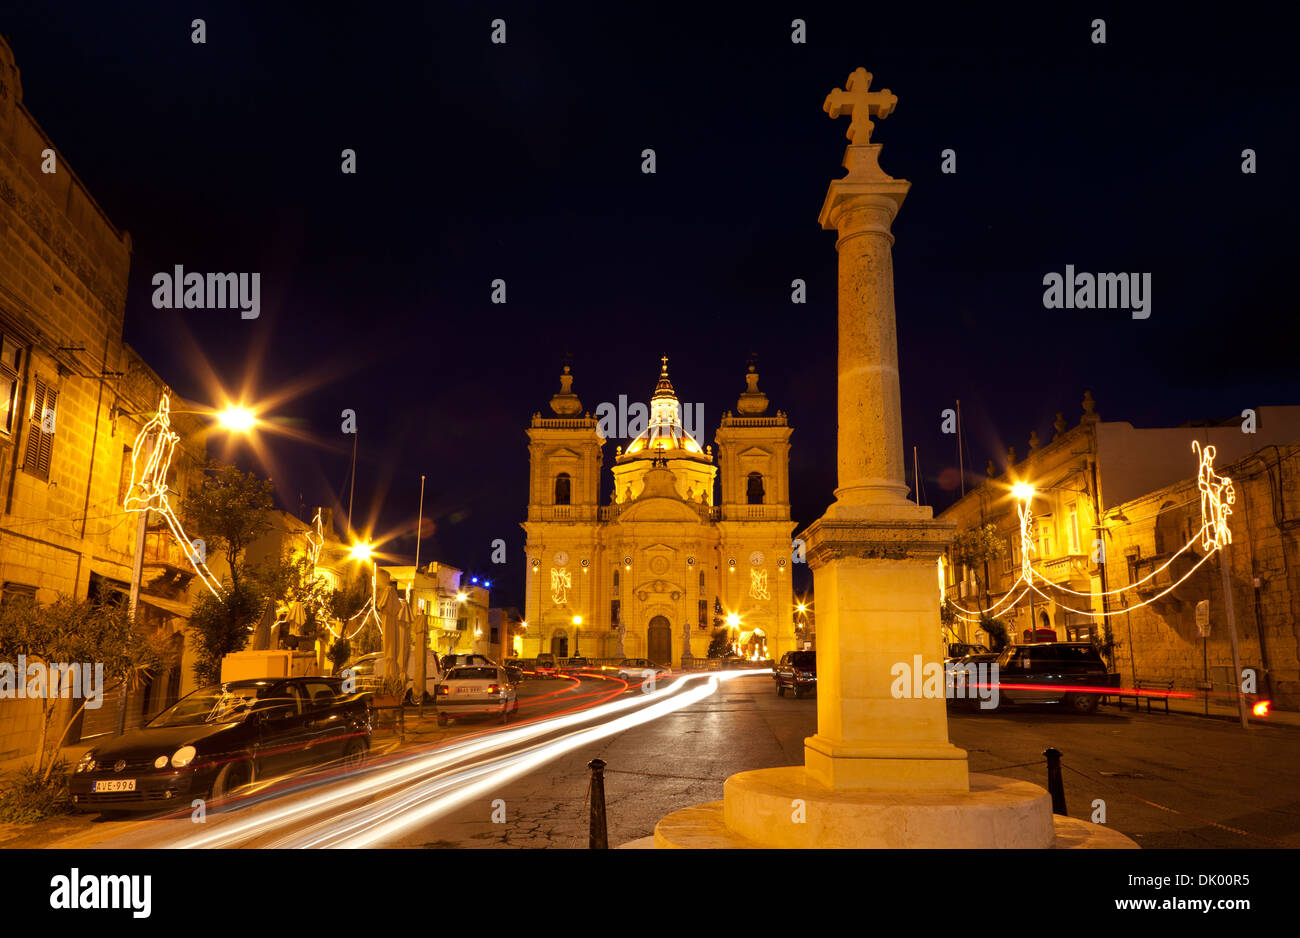 The town square and parish church of Xaghra town in Gozo in Malta. Stock Photo